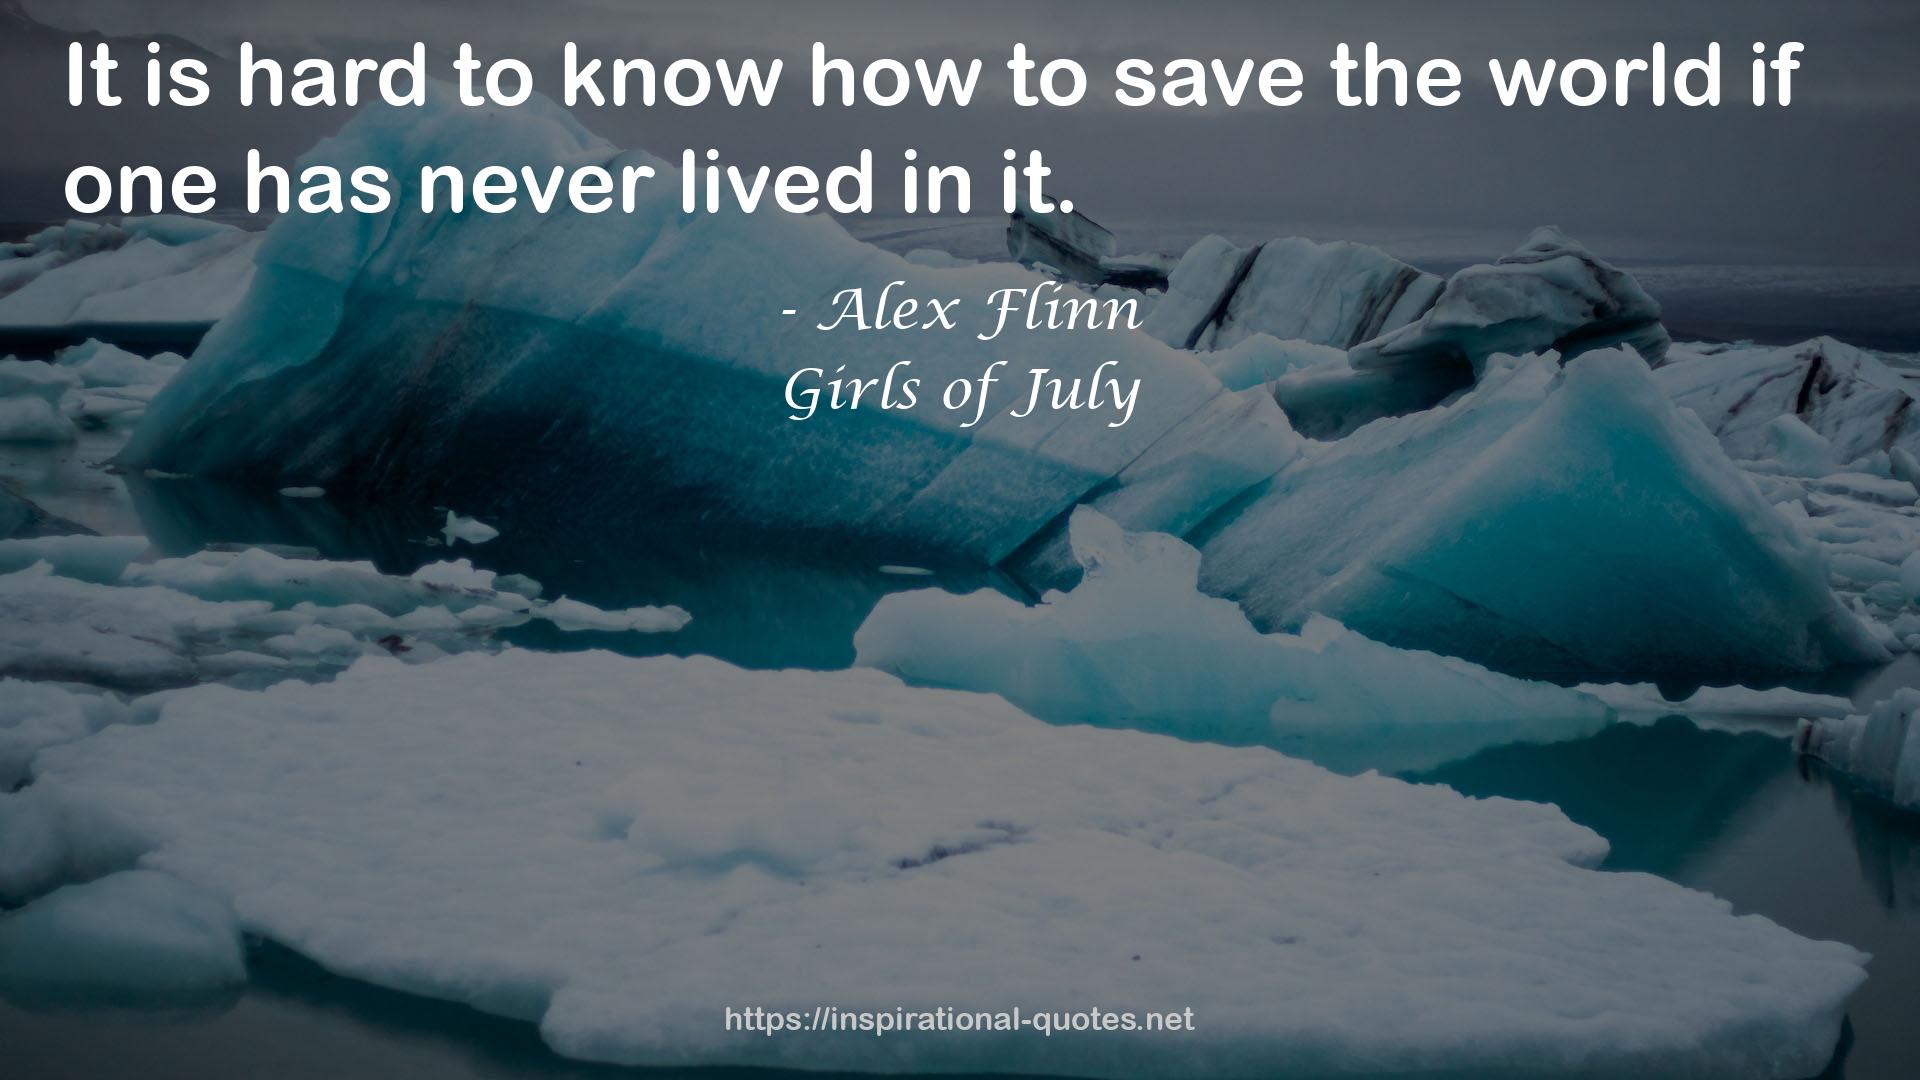 Girls of July QUOTES